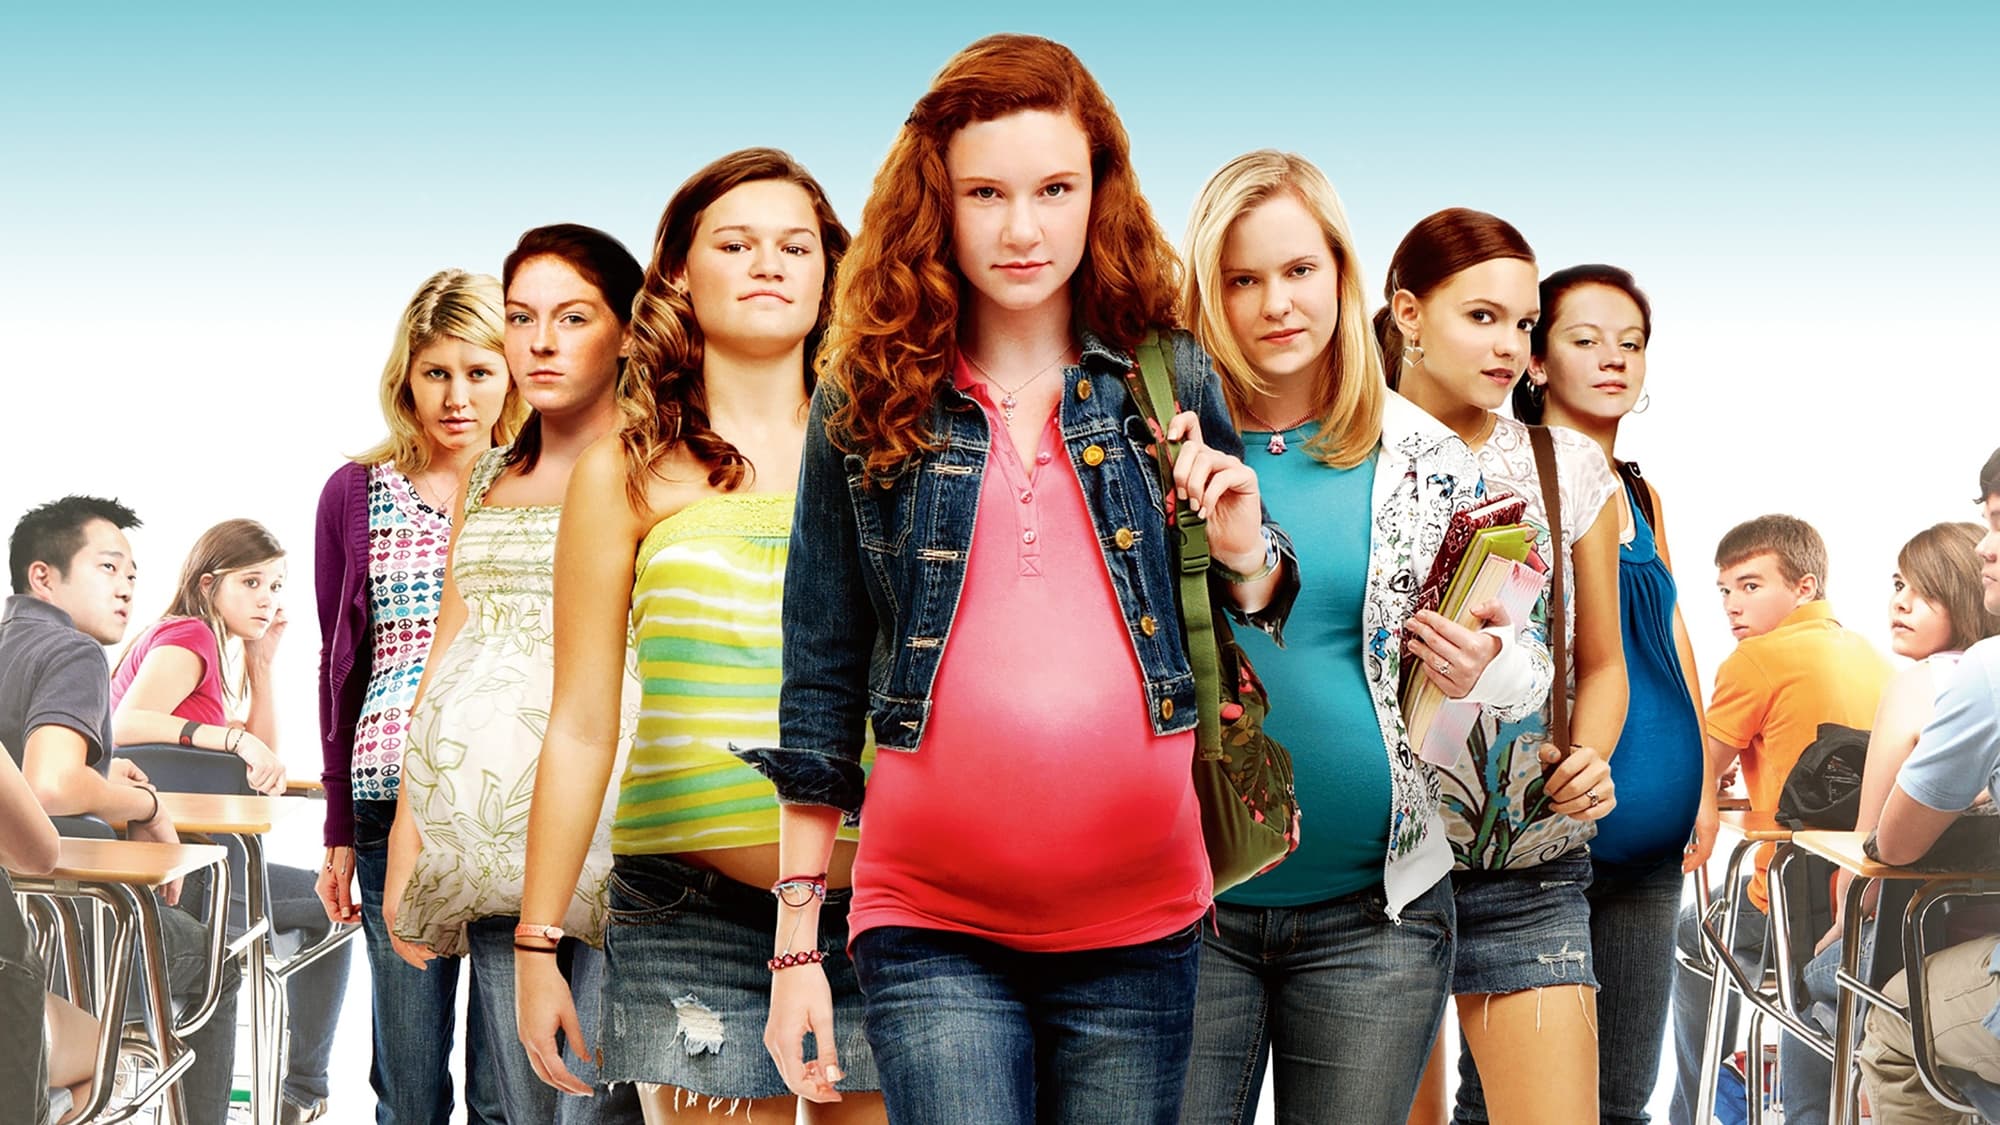 The Pregnancy Pact 2010 123movies